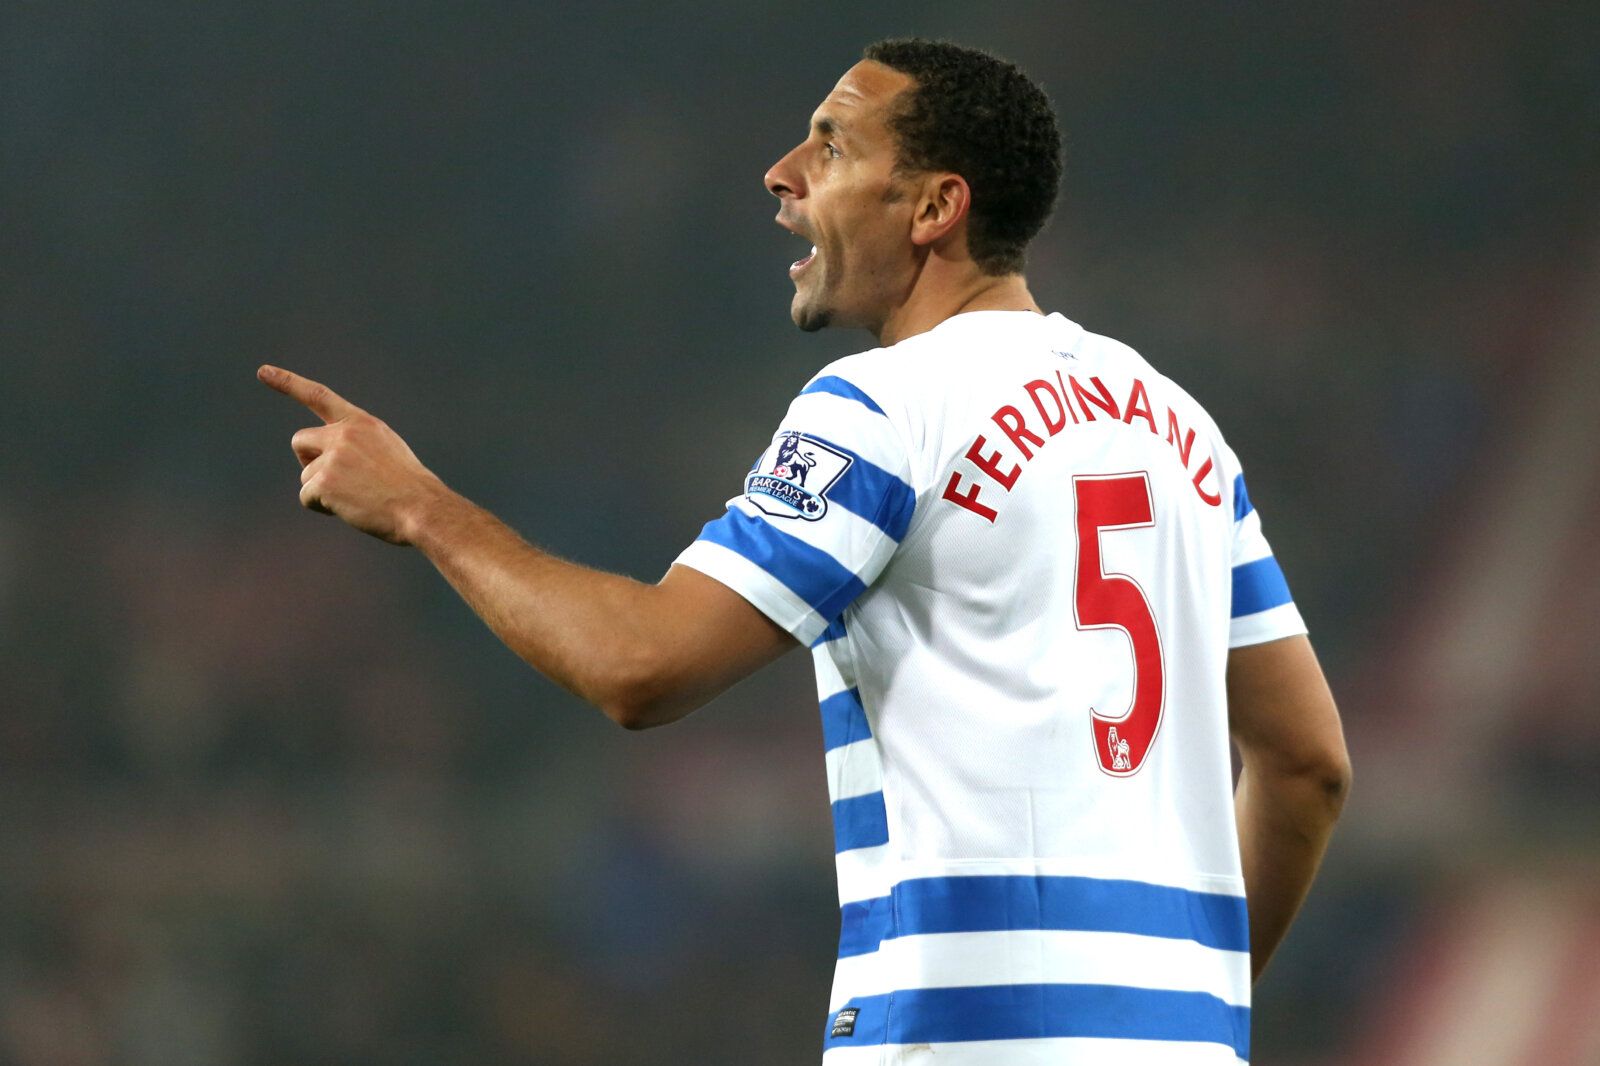 Football - Sunderland v Queens Park Rangers - Barclays Premier League - The Stadium of Light - 14/15 - 10/2/15 
QPR's Rio Ferdinand 
Mandatory Credit: Action Images / Lee Smith 
EDITORIAL USE ONLY. No use with unauthorized audio, video, data, fixture lists, club/league logos or 